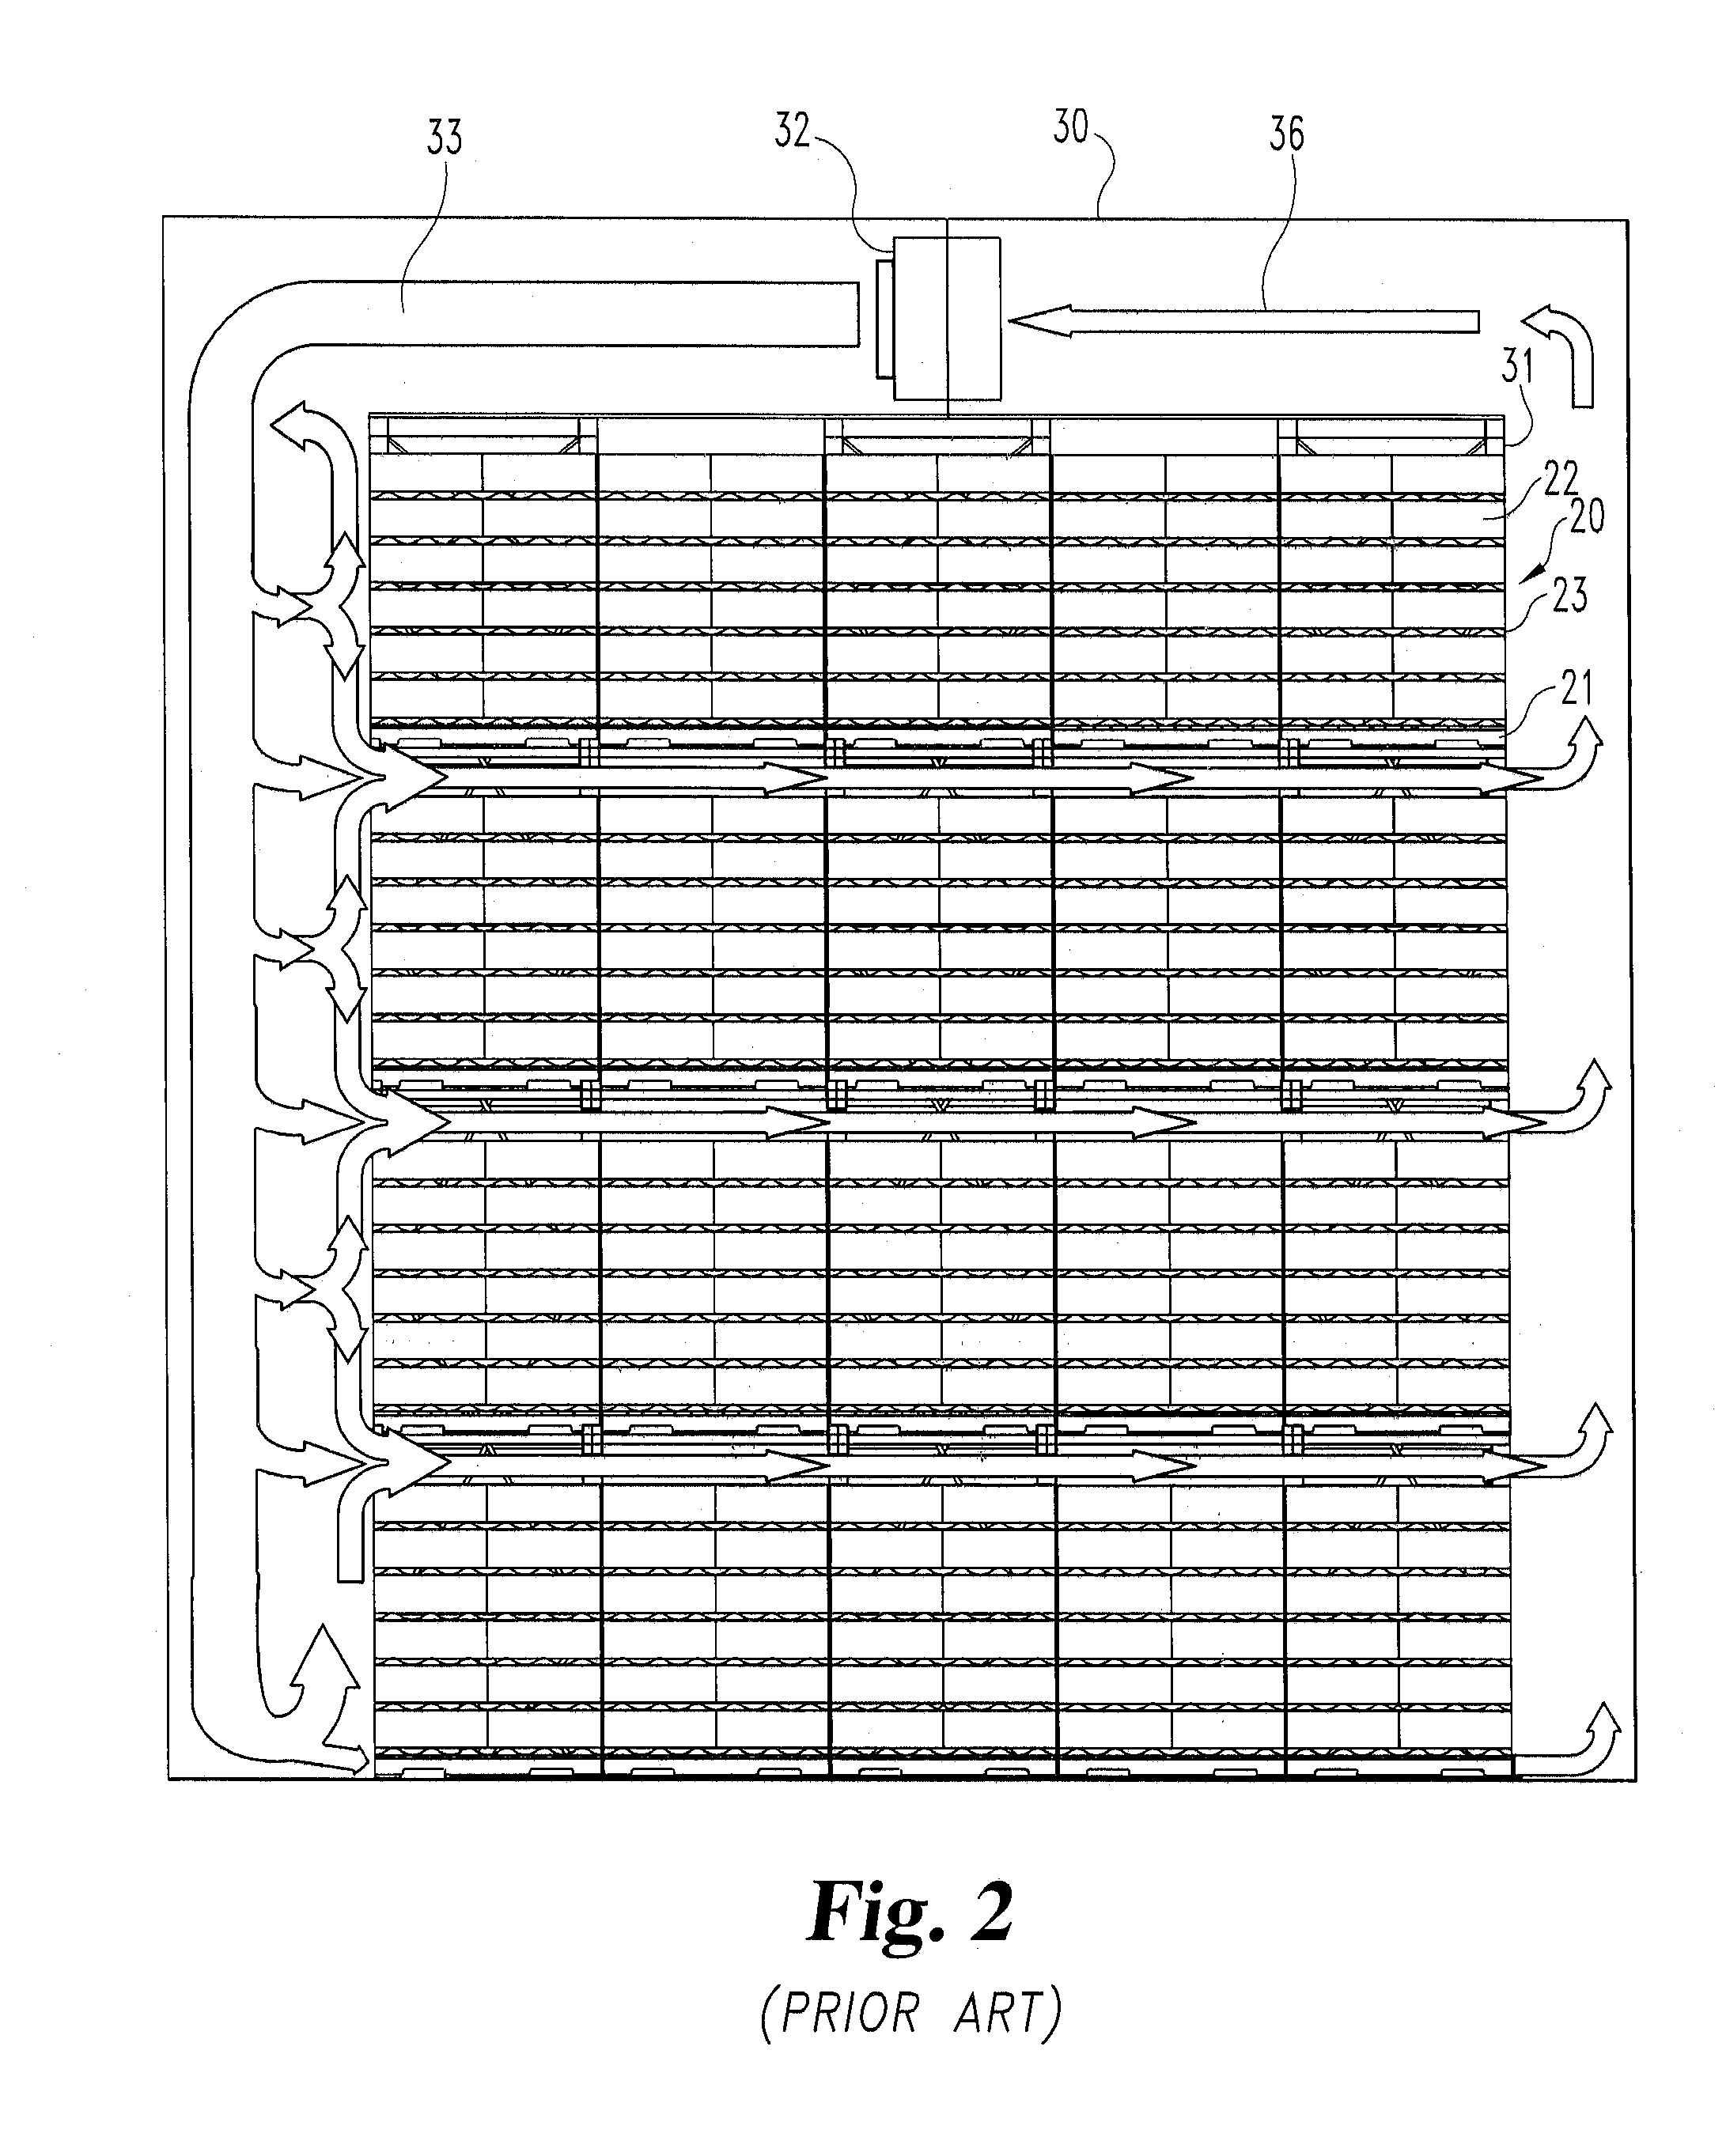 Apparatus for blast freezing palletized product